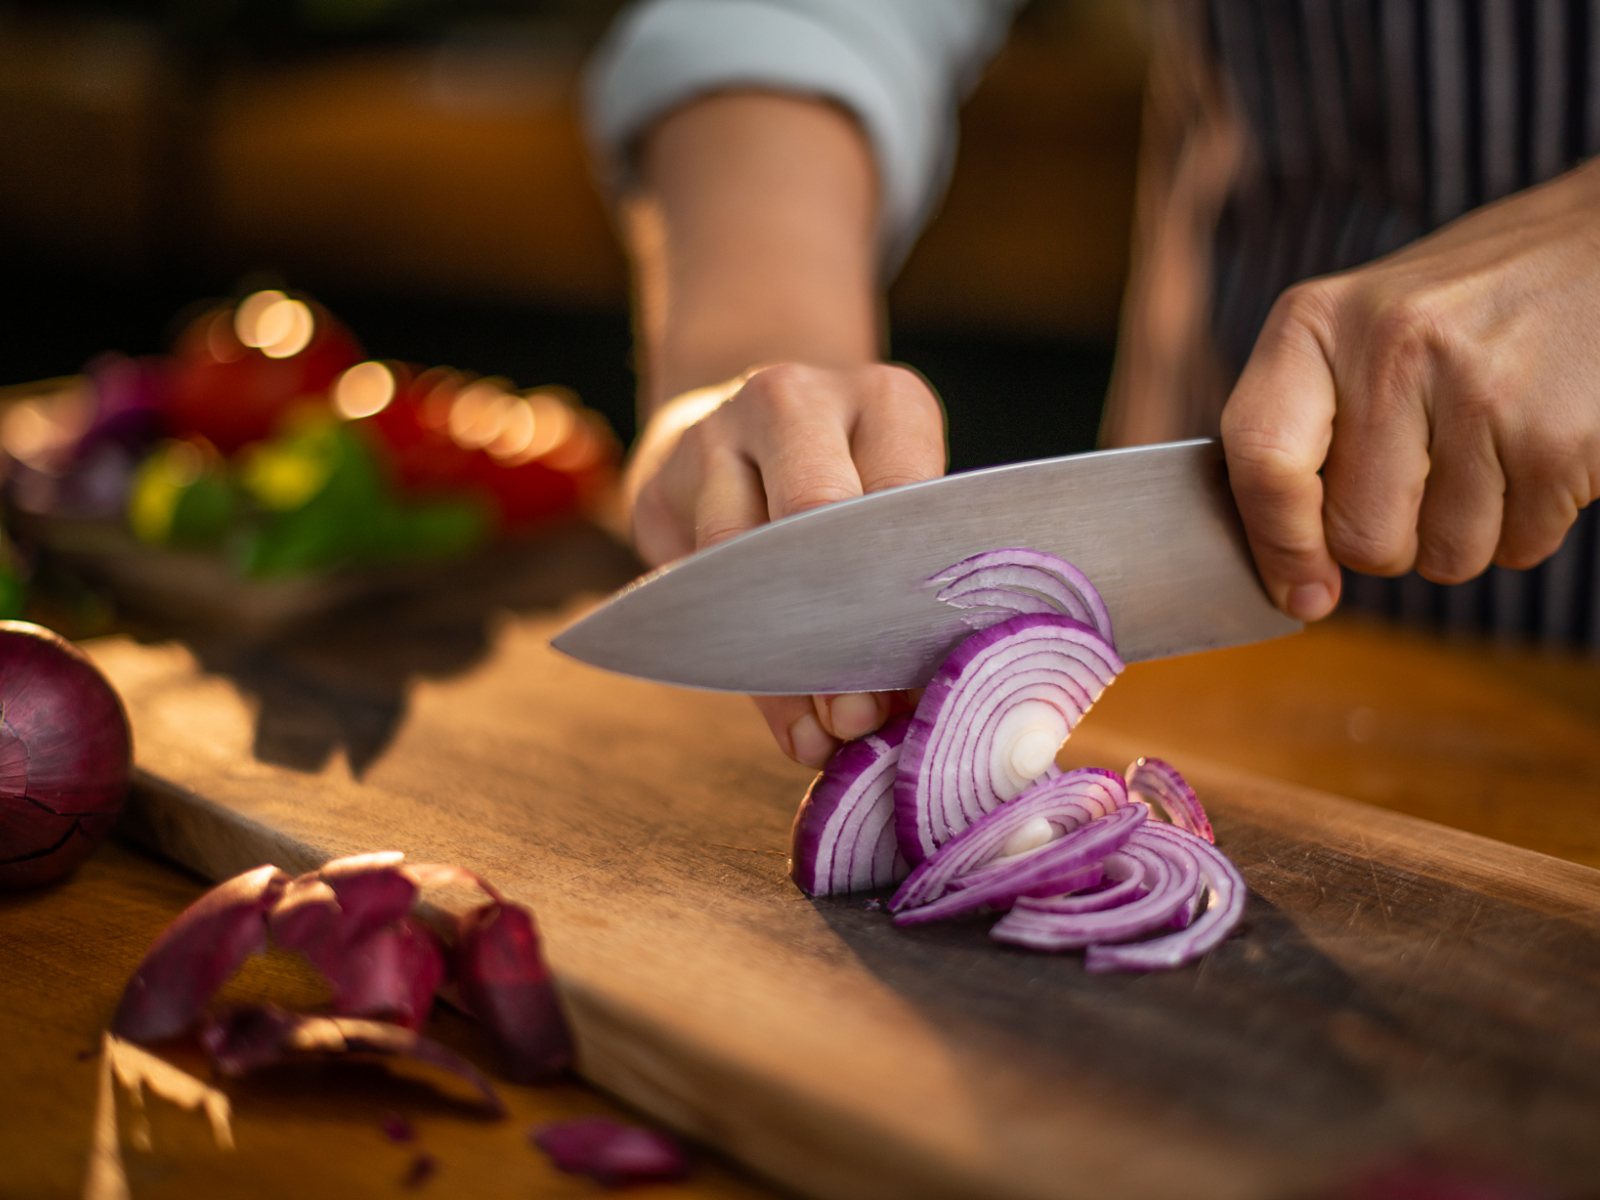 slicing a red onion on a cutting board